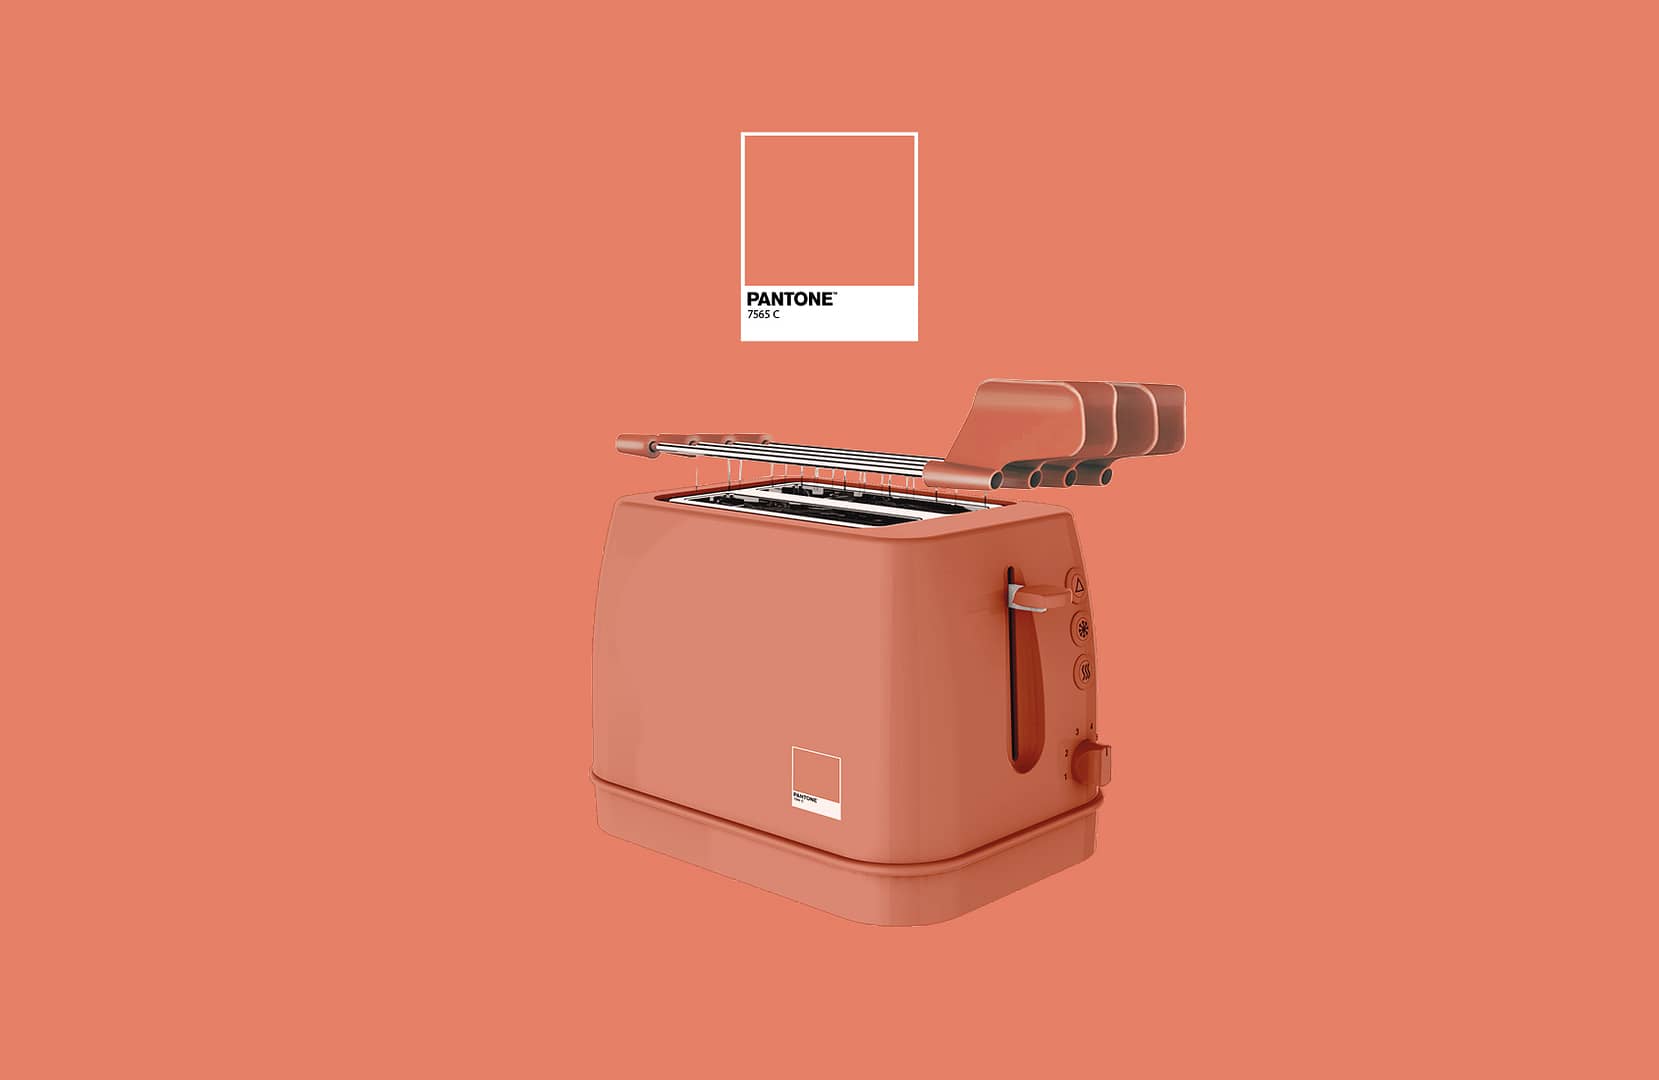 CMF design for the application of new color distributions - red brick - to small appliances designed by Bimar & Pantone